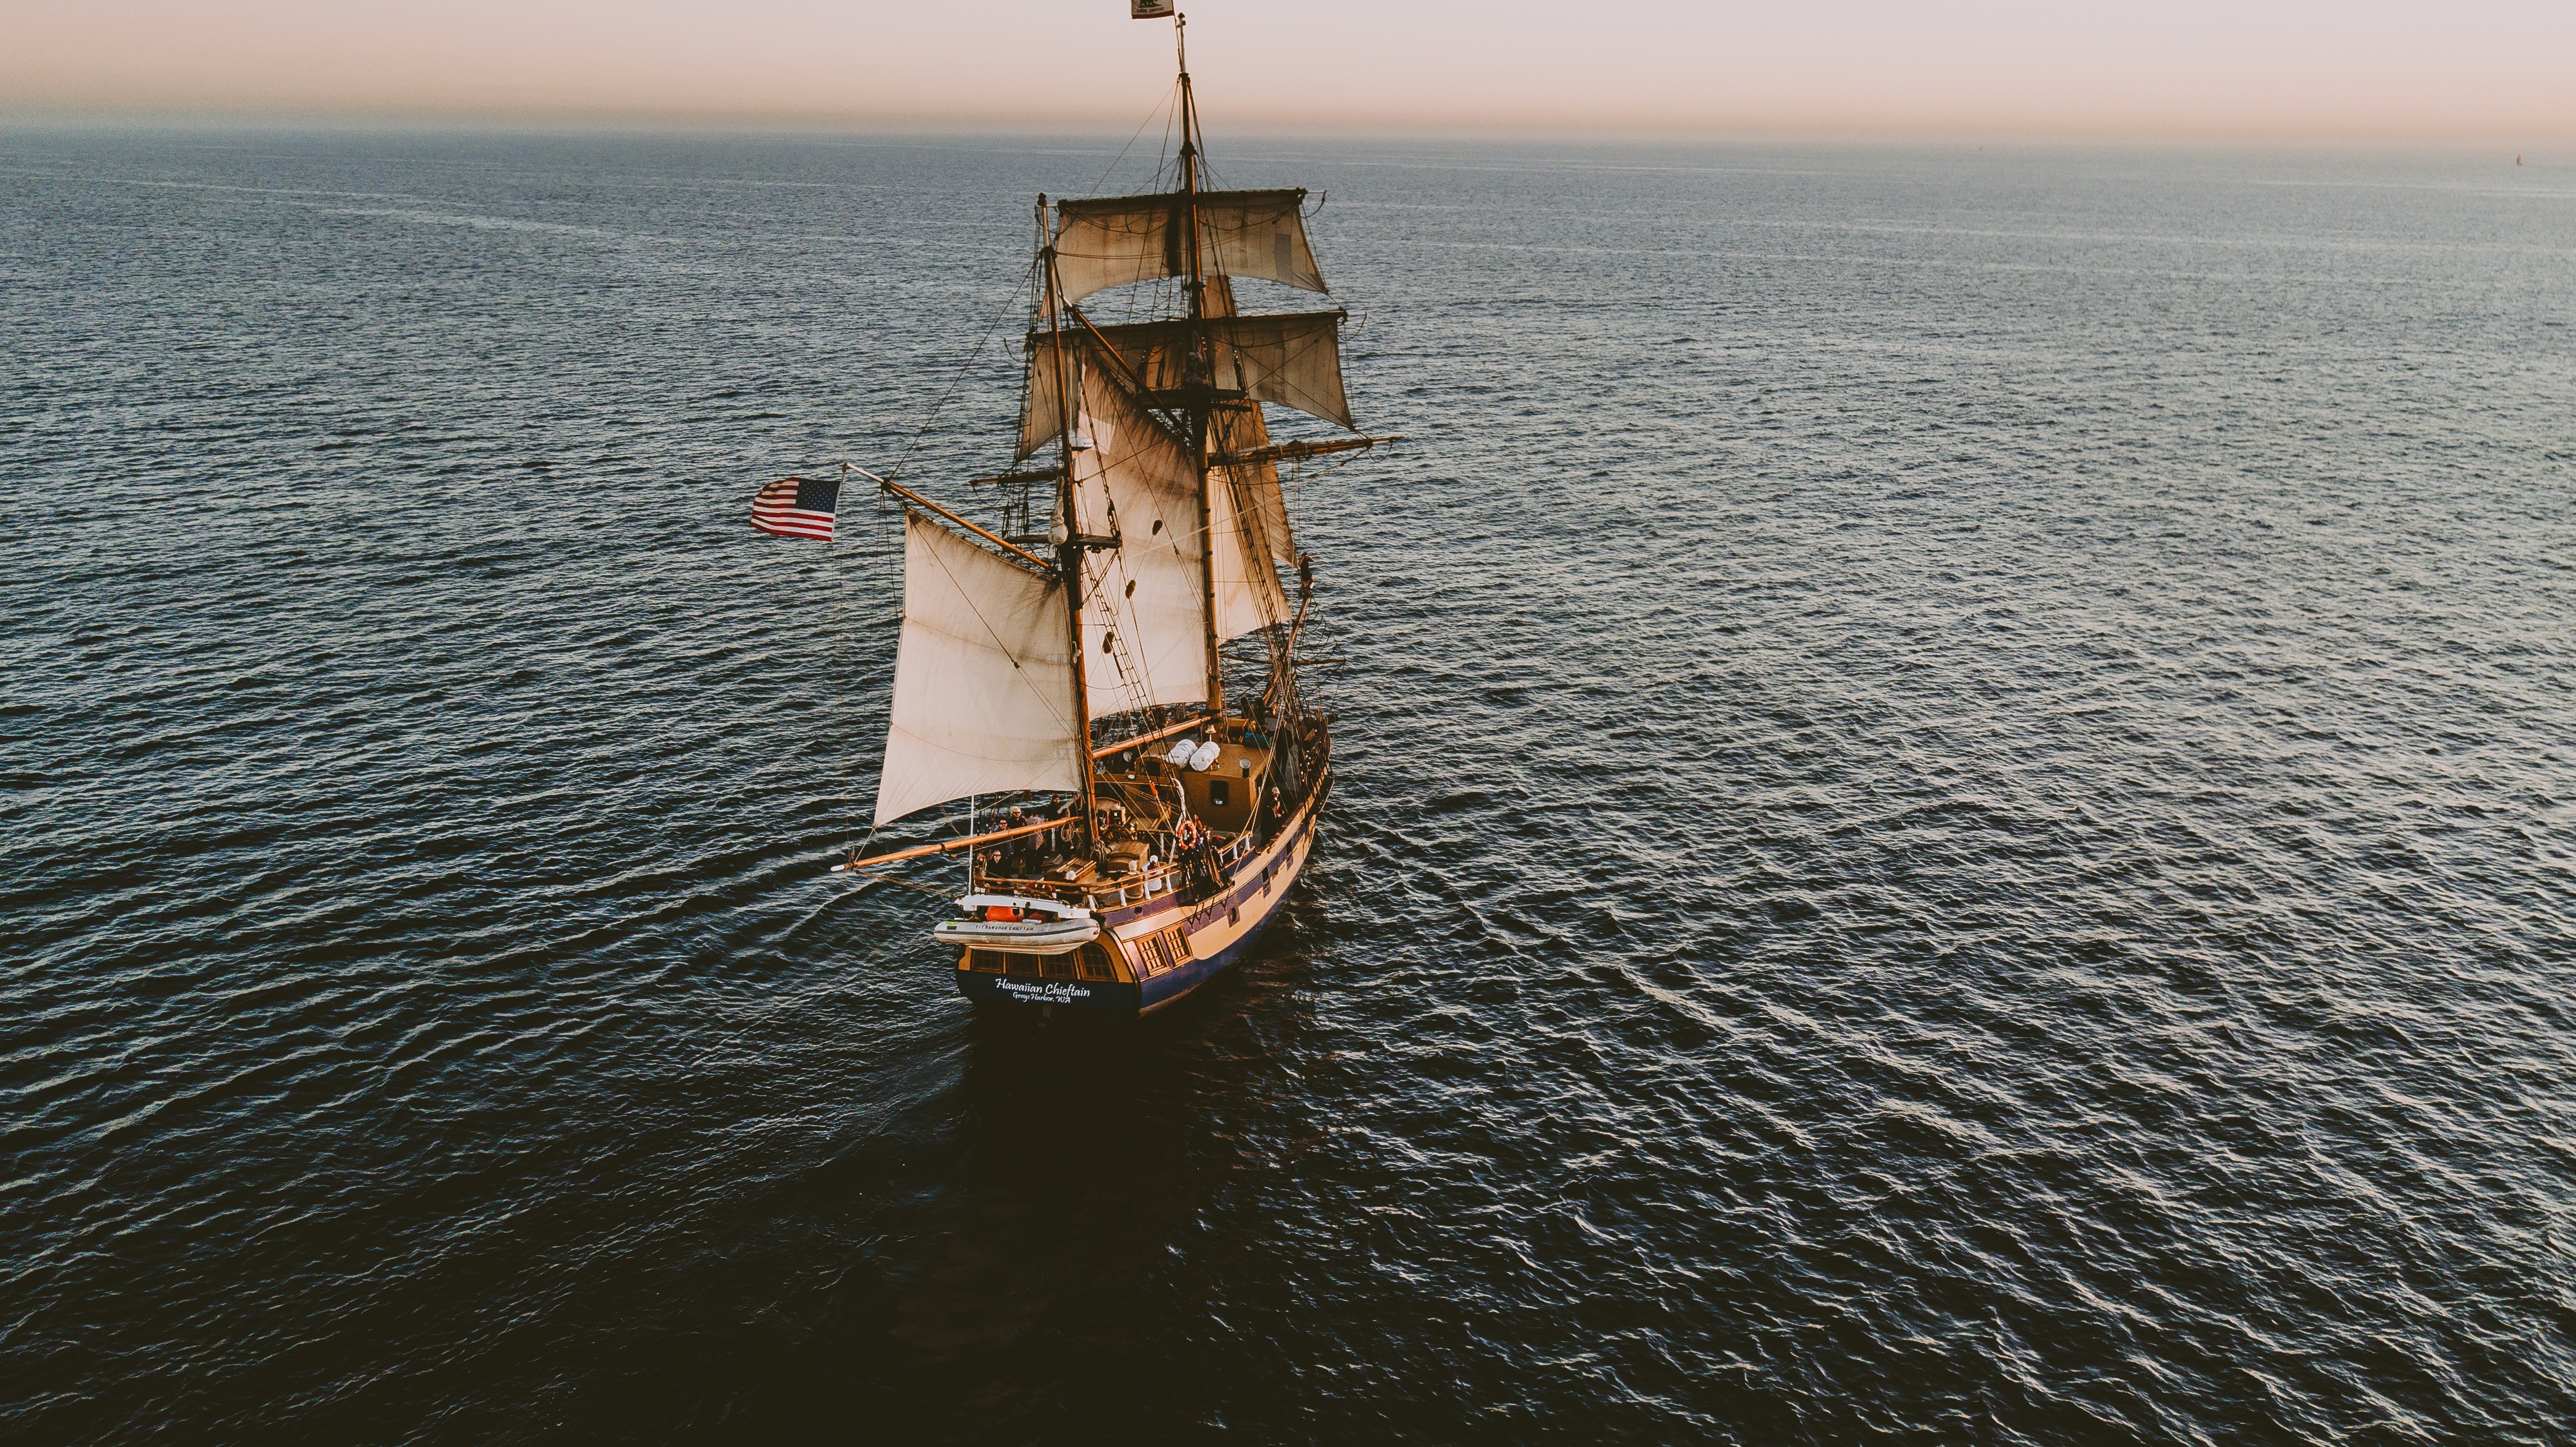 115495 download wallpaper nature, ocean, sail, sails, ship, oceans screensavers and pictures for free